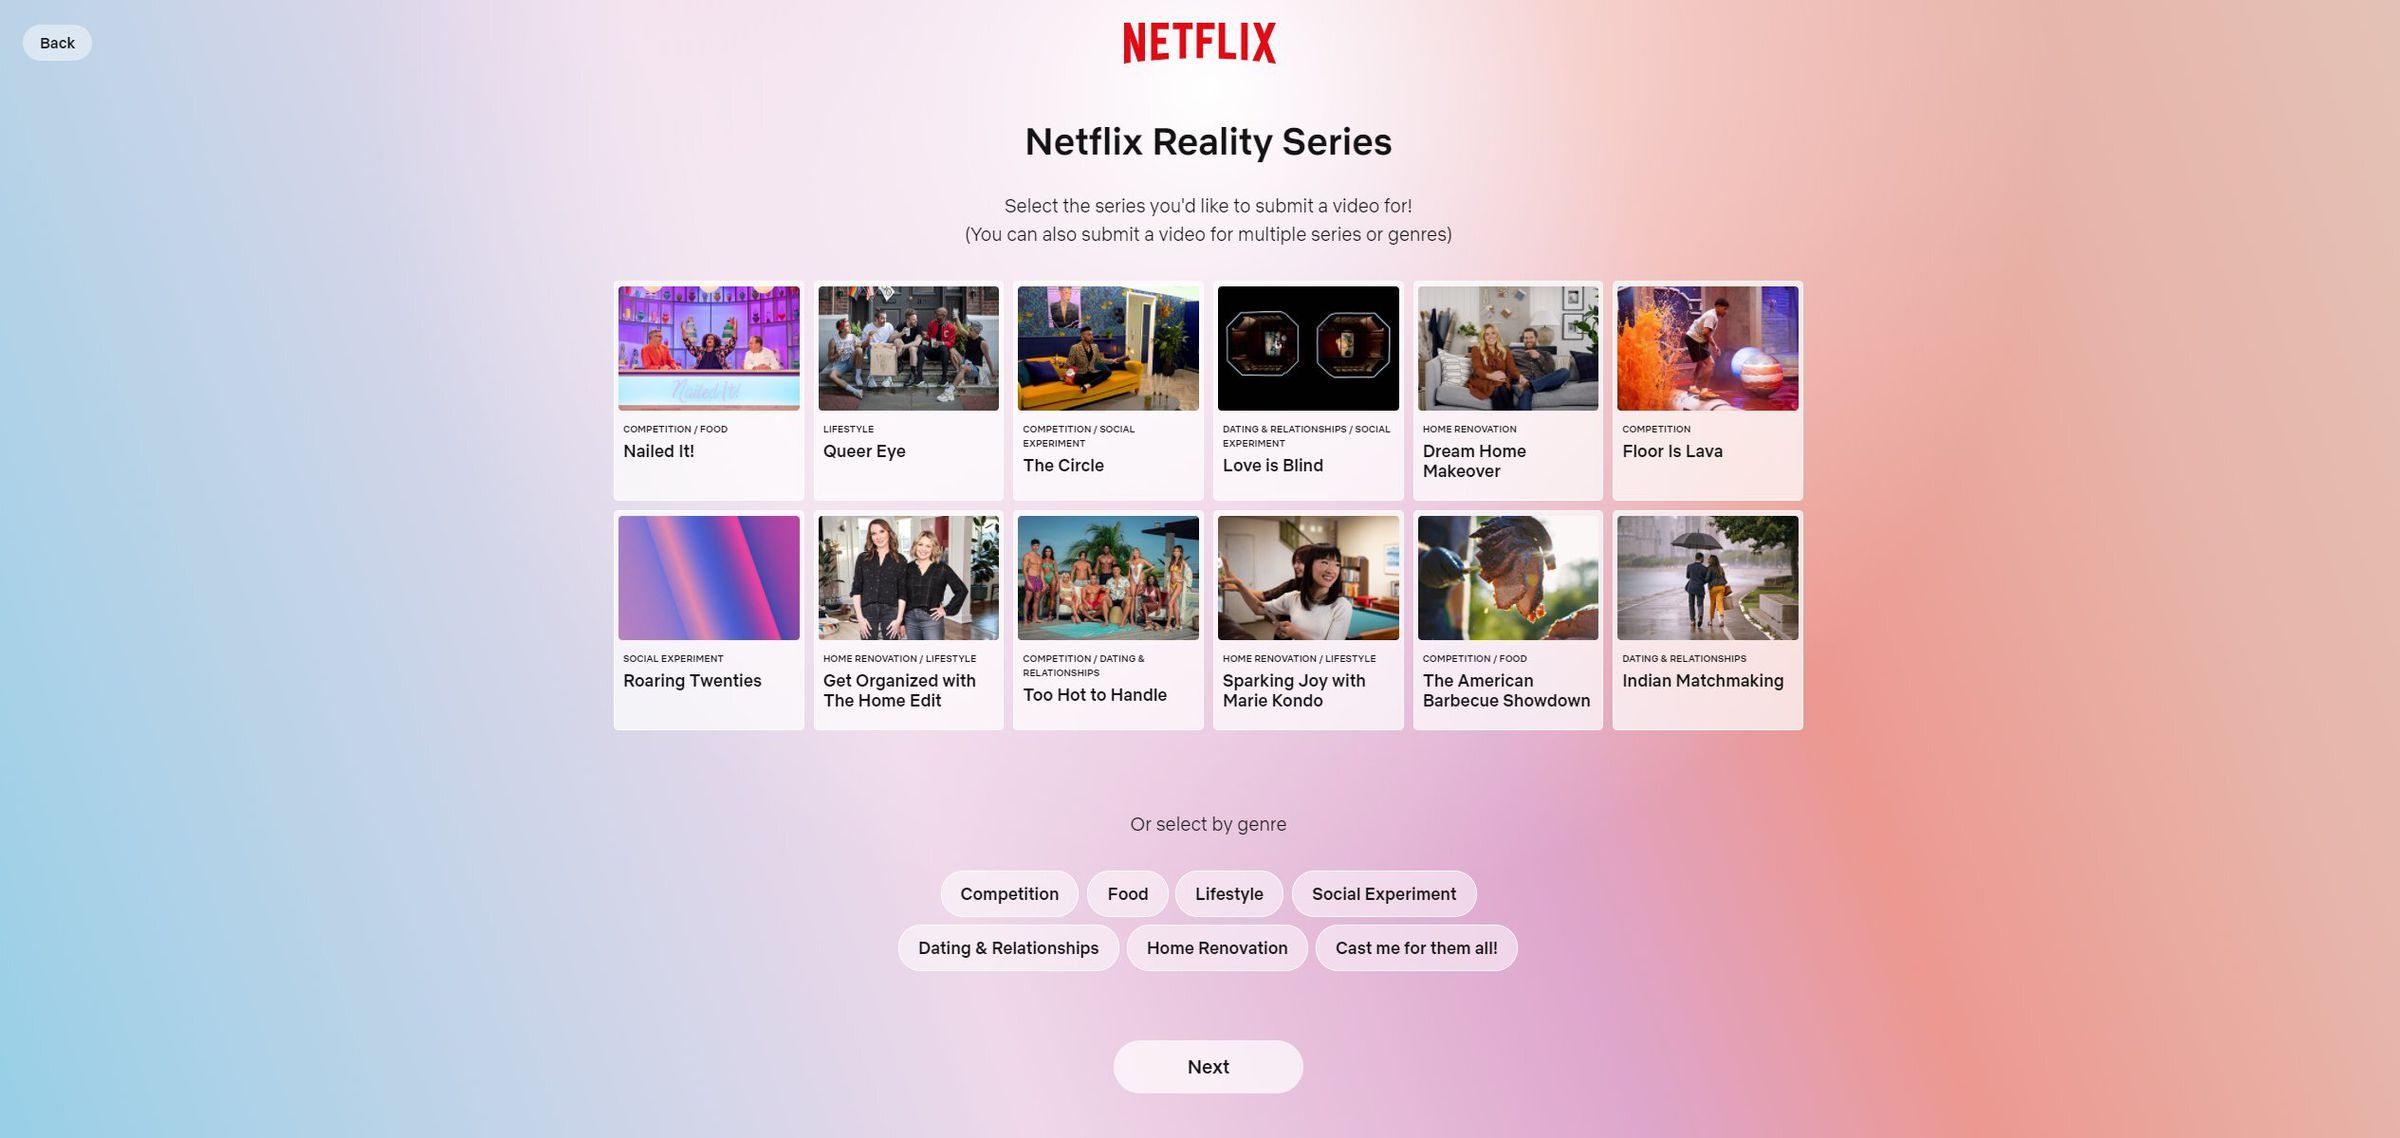 Netflix will let you apply for shows across a broad spectrum of topics at once.